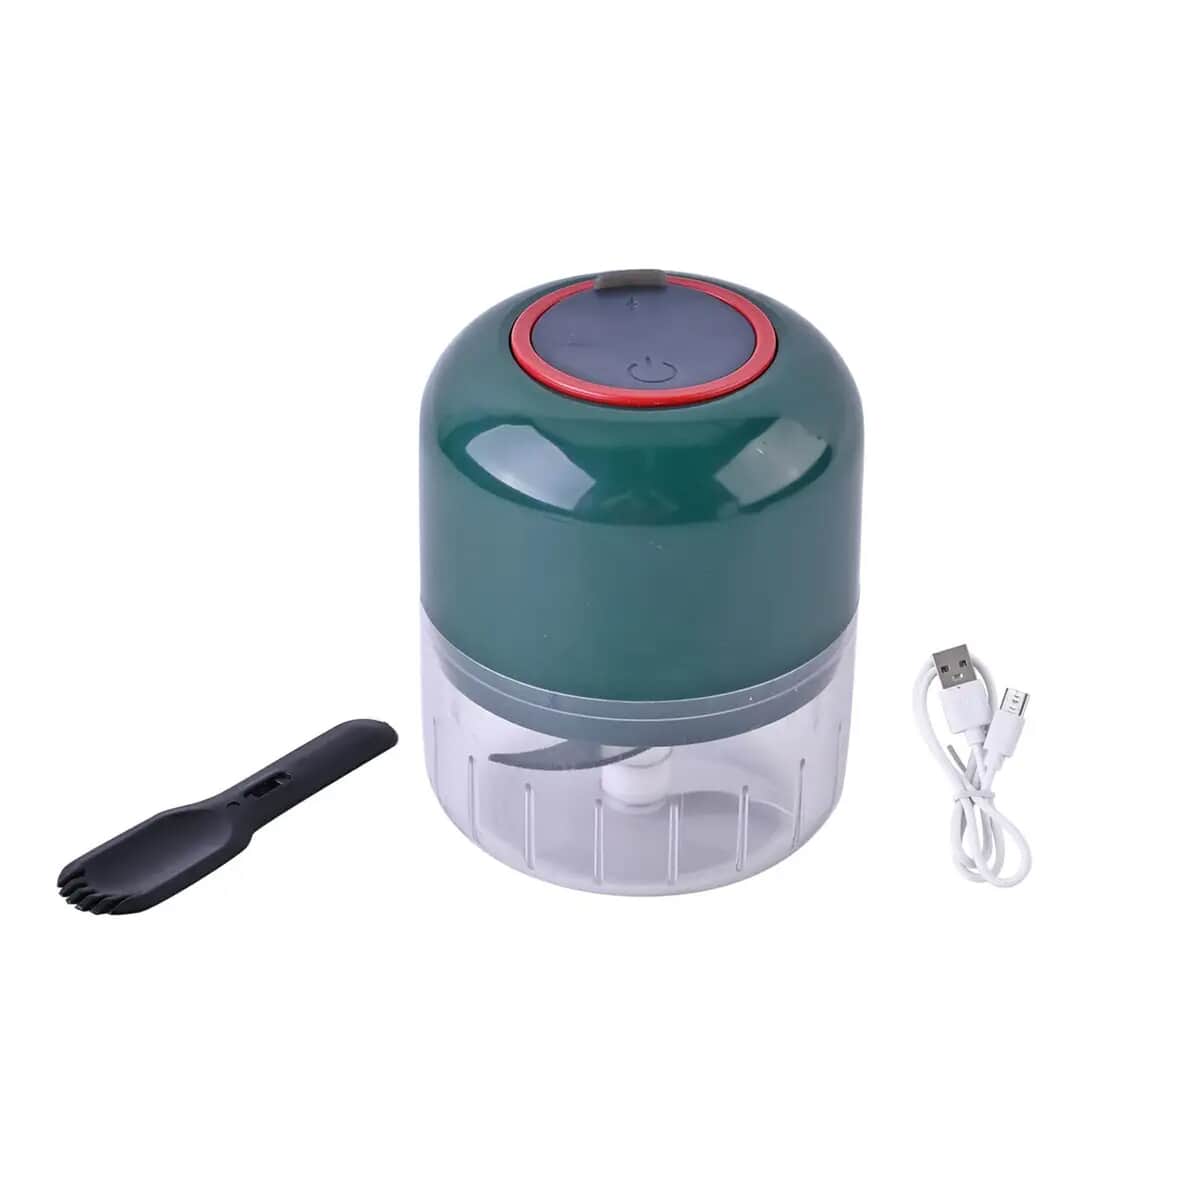 Rechargeable Garlic Chopper with USB Cable - Green image number 0